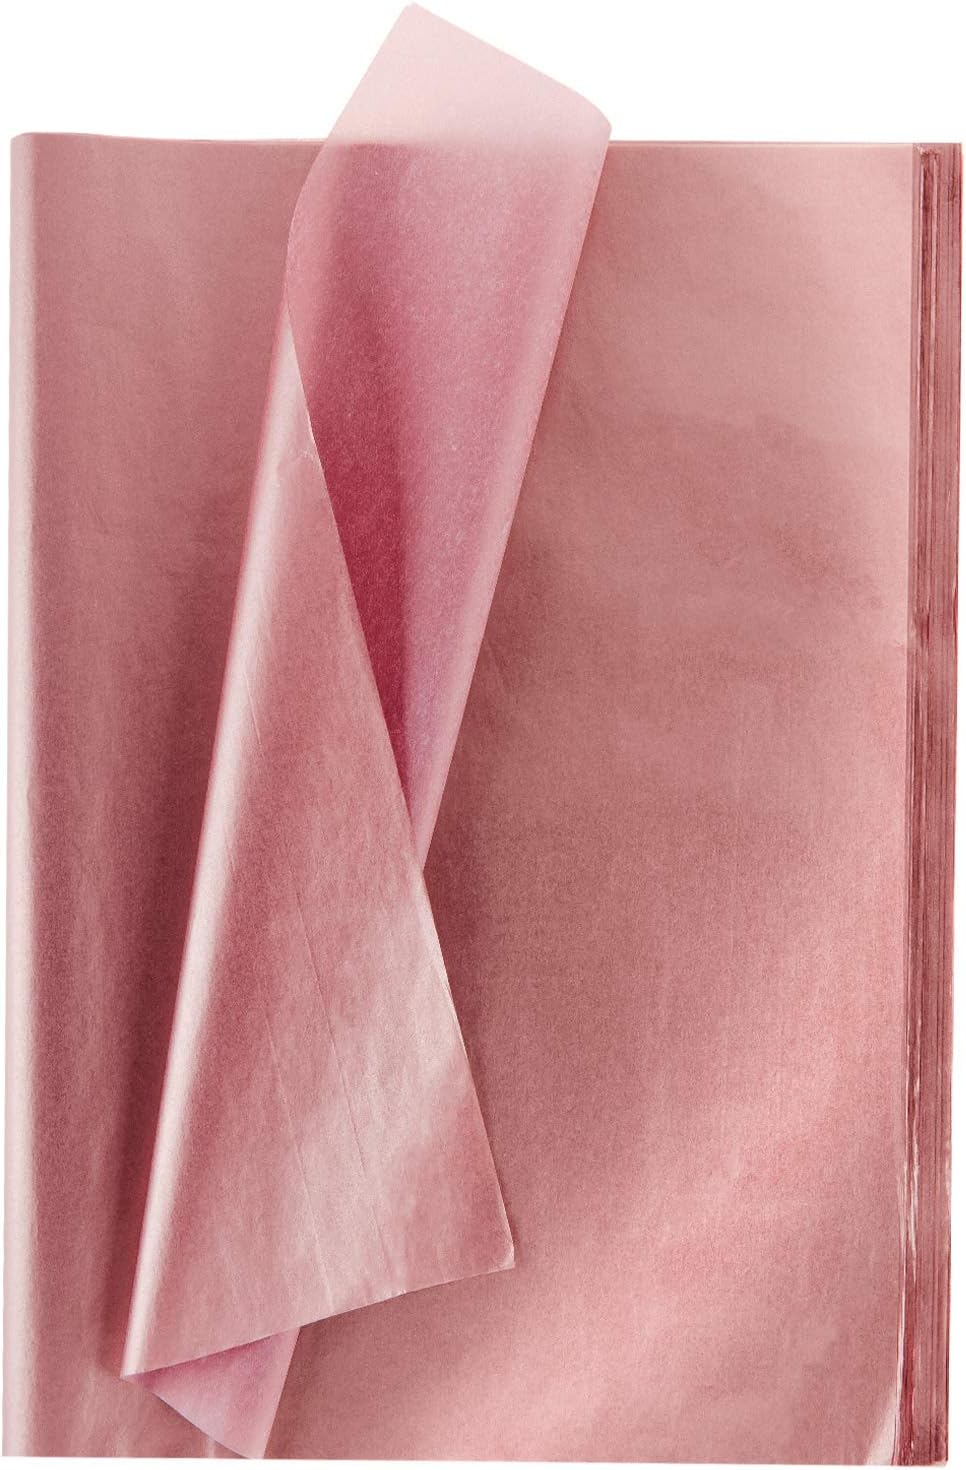 Whaline Rose Gold Tissue Paper Bulk, 100 Sheets Metallic Gift Wrapping Paper for Home, Kitchen, Weddings, Birthday Party, Showers, Arts Crafts, DIY